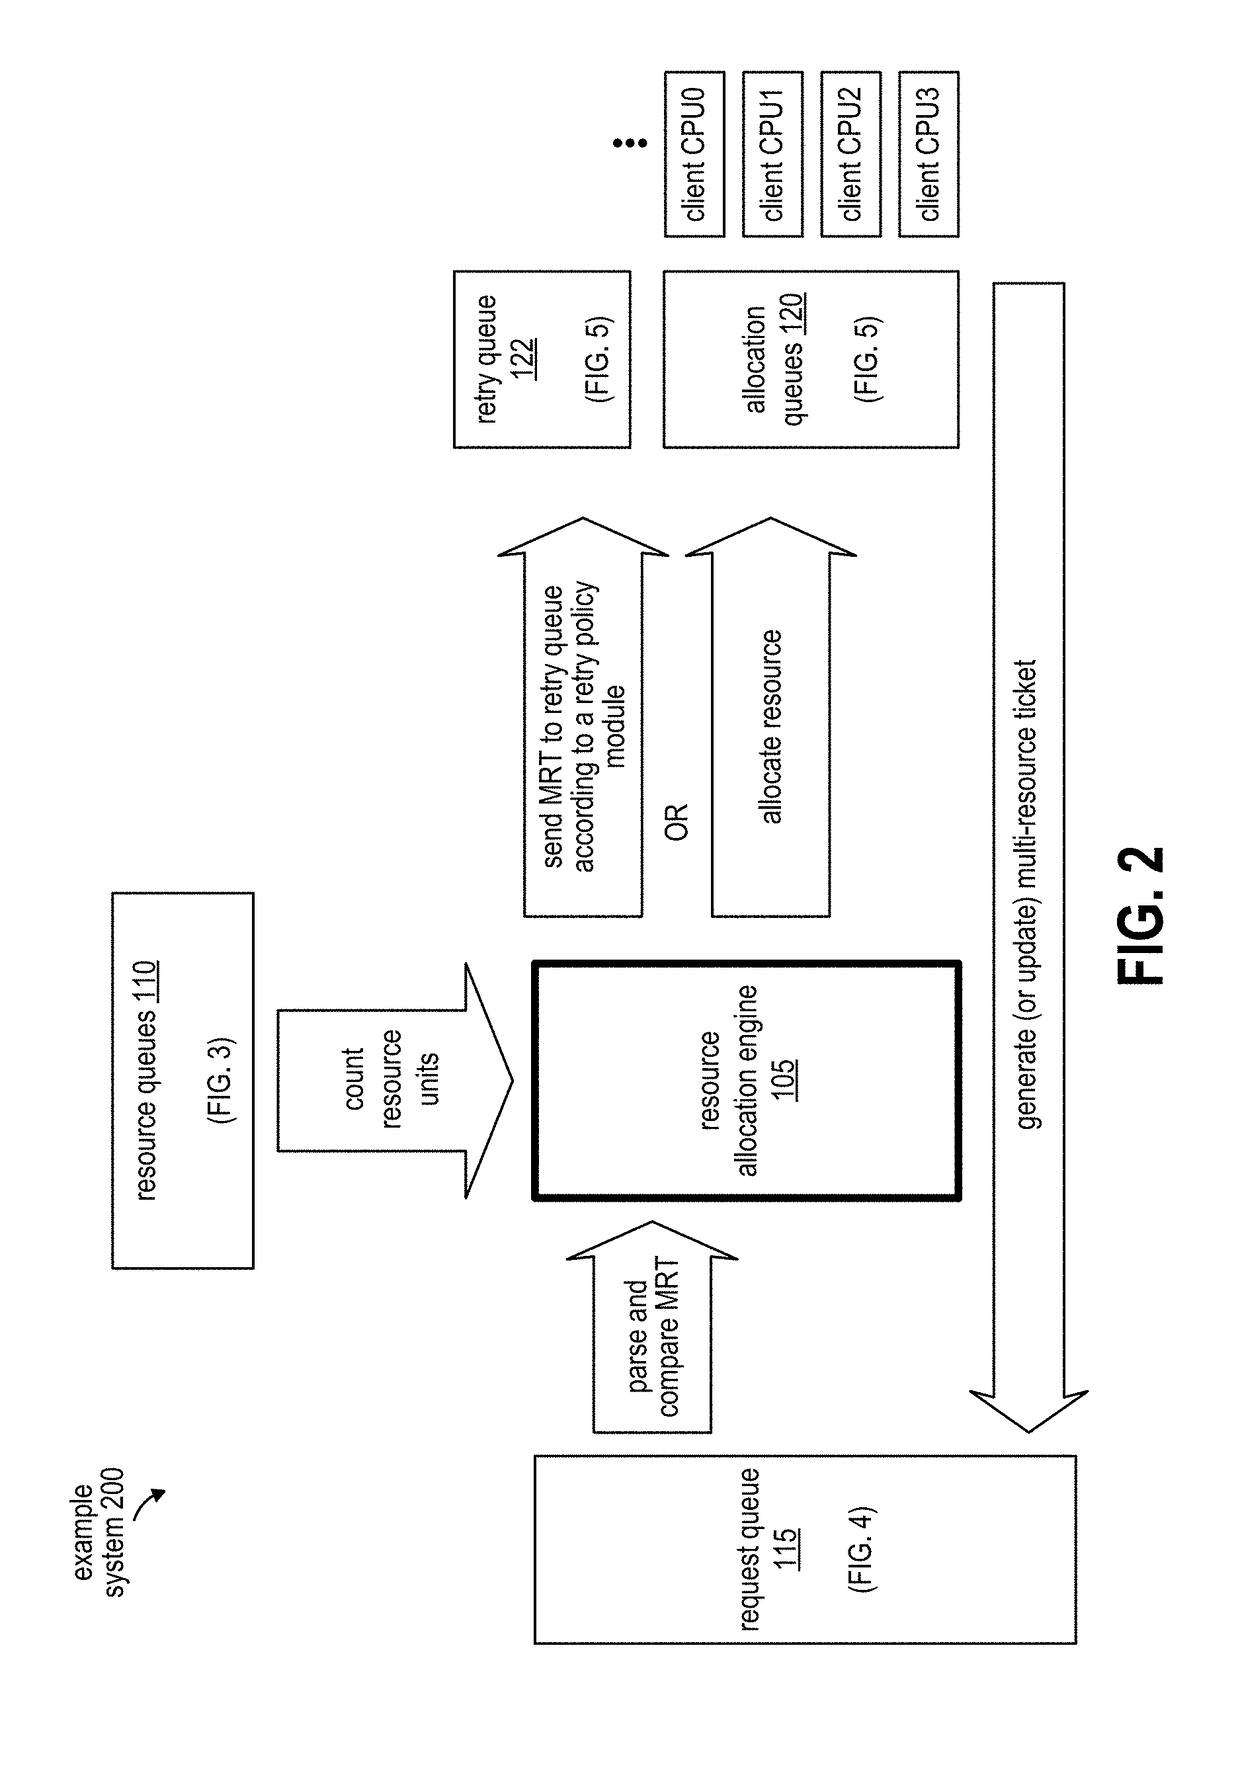 Accelerated atomic resource allocation on a multiprocessor platform